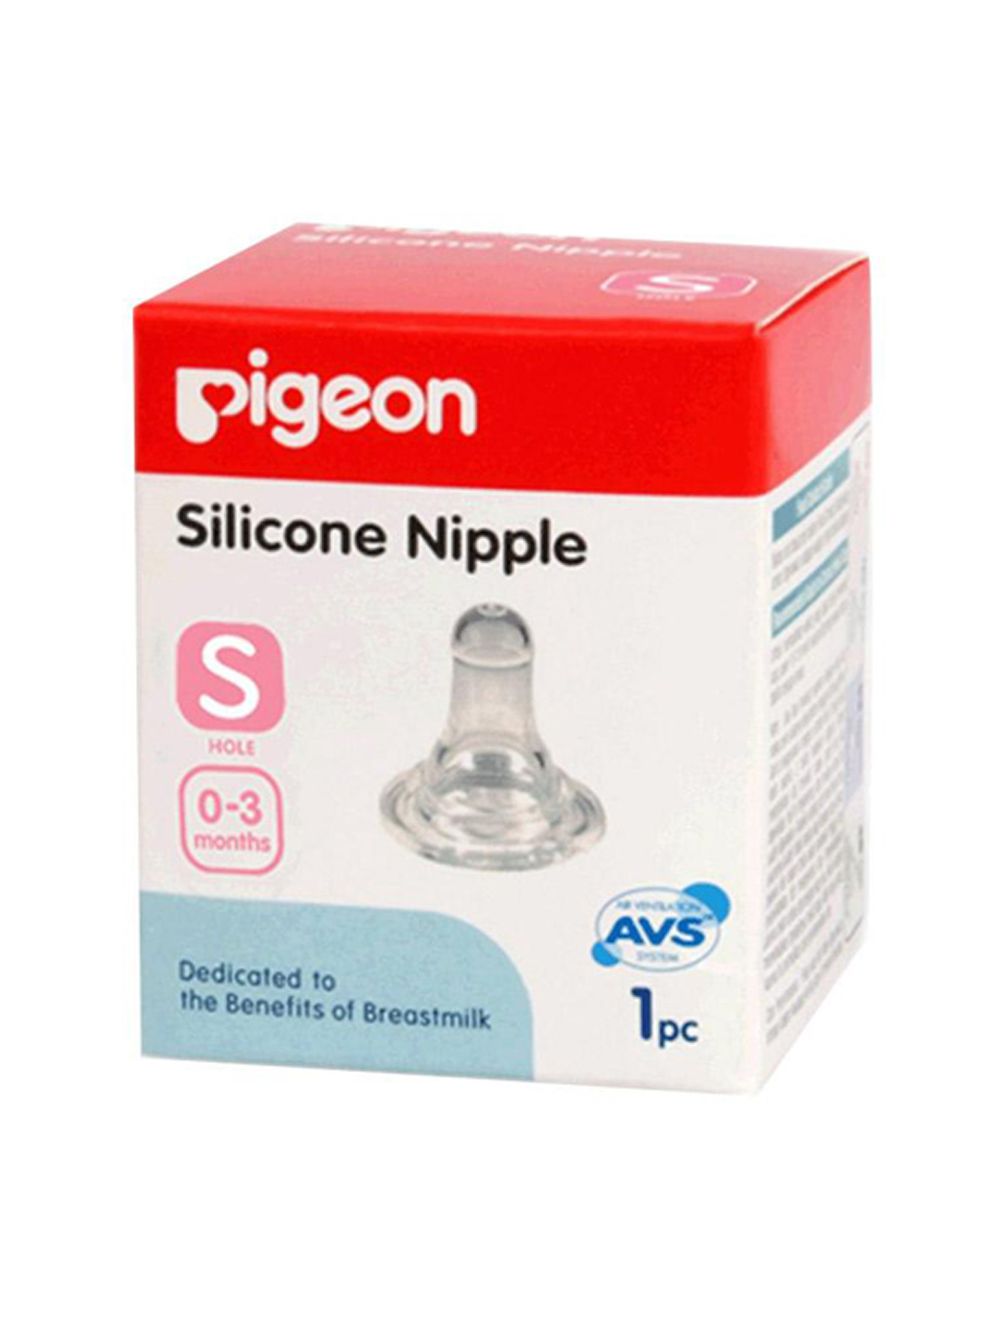 Pigeon Nipple - Silicone [B17347] product available at family pharmacy online buy now at qatar doha